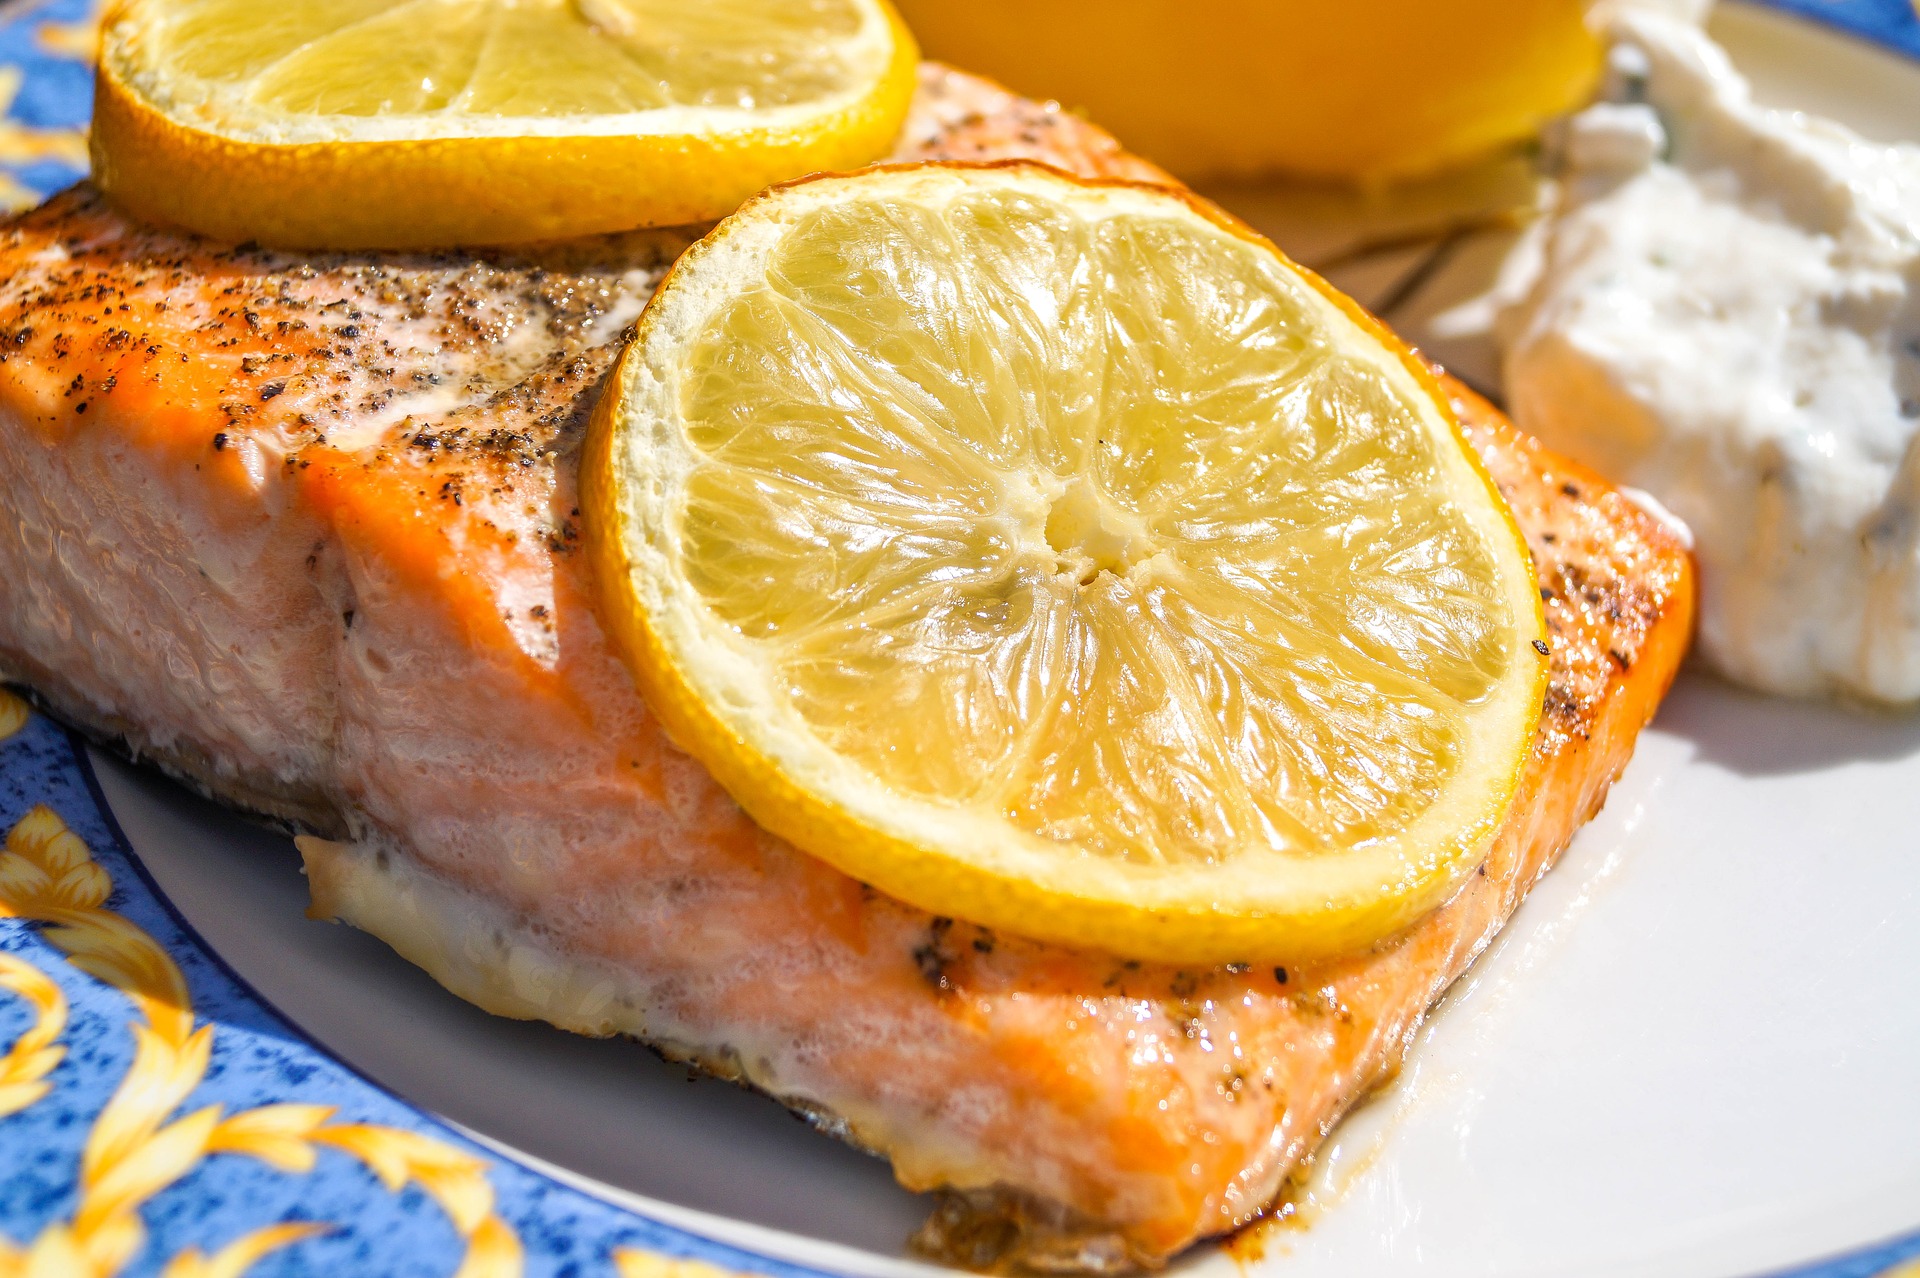 Top 3 Sources of Omega 3 Fatty Acids